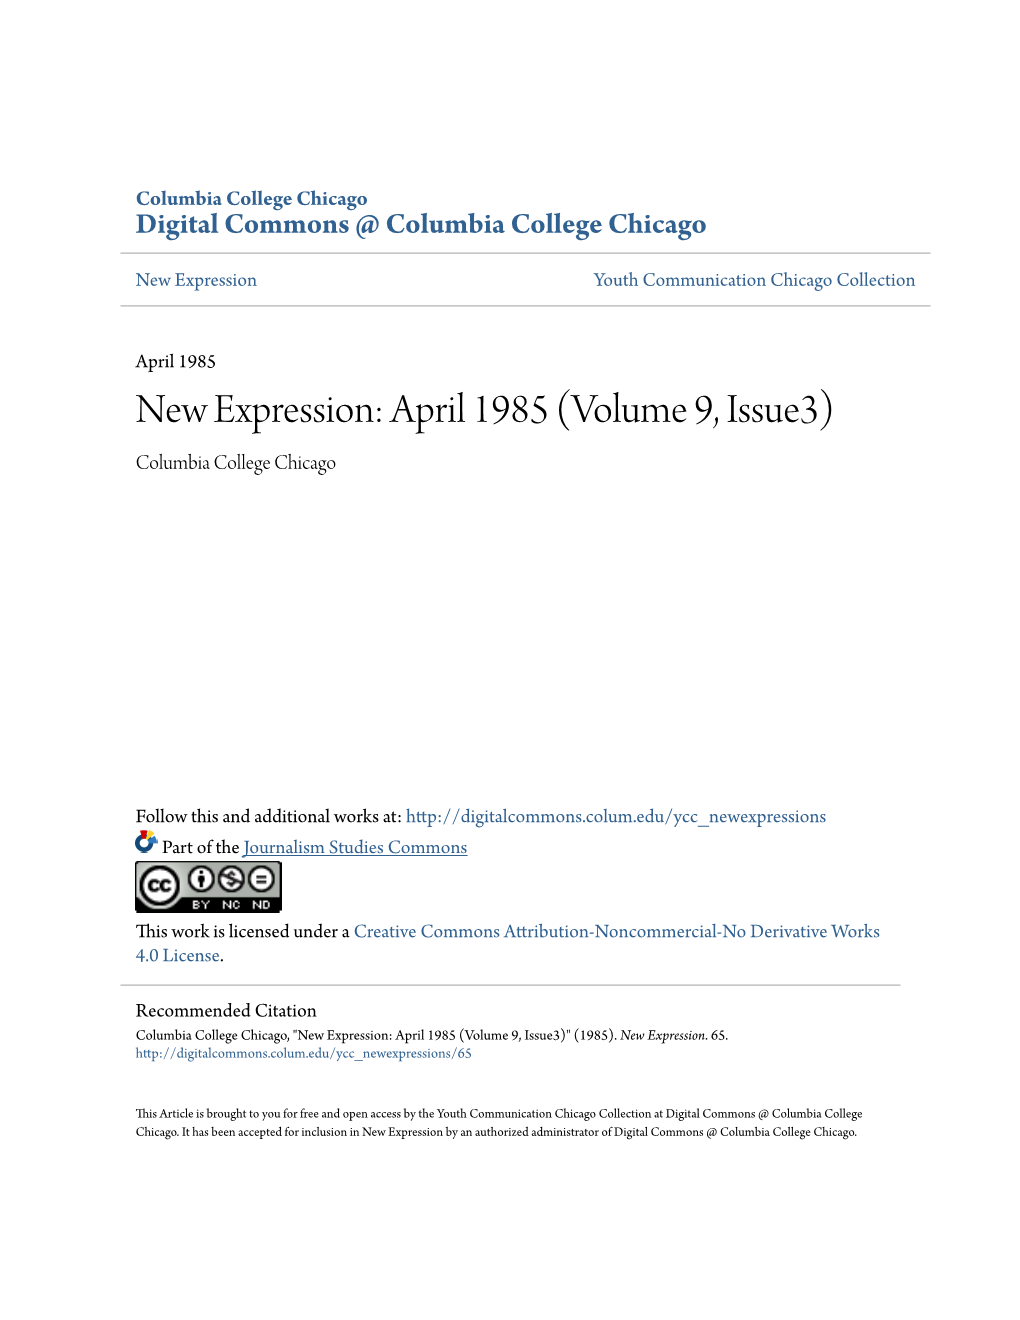 New Expression: April 1985 (Volume 9, Issue3) Columbia College Chicago